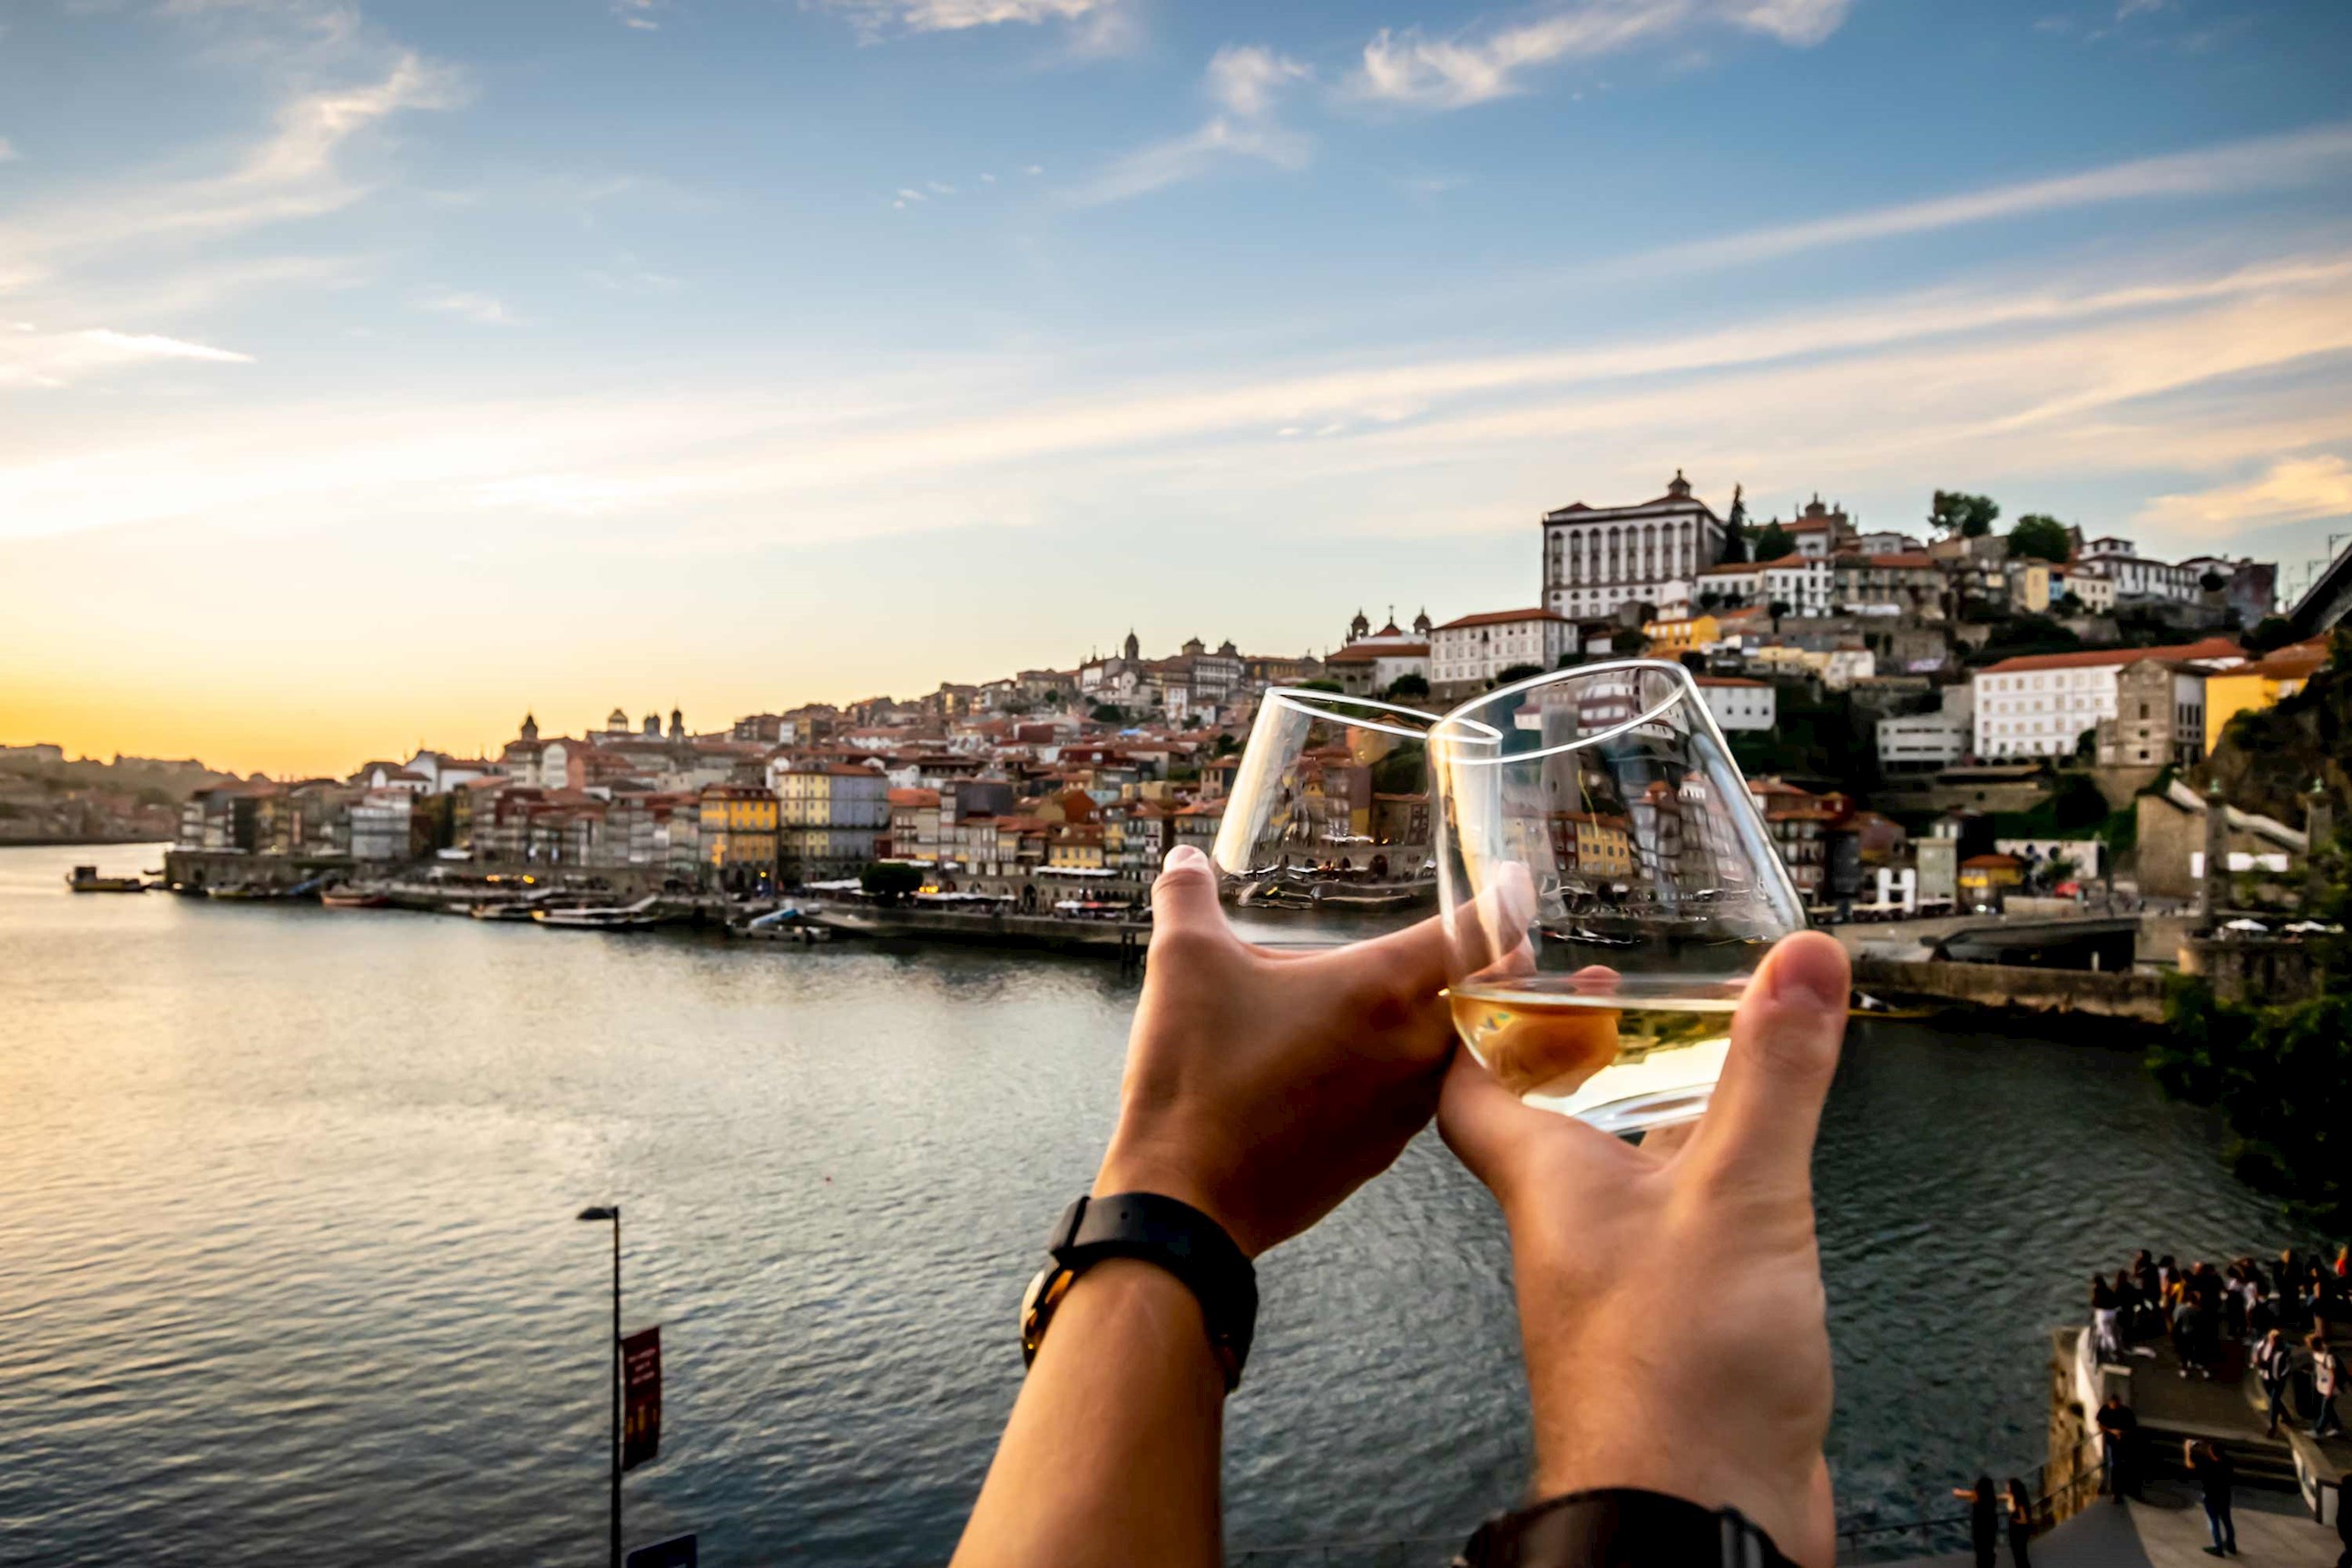 Cruise and dinner in Douro, Portugal